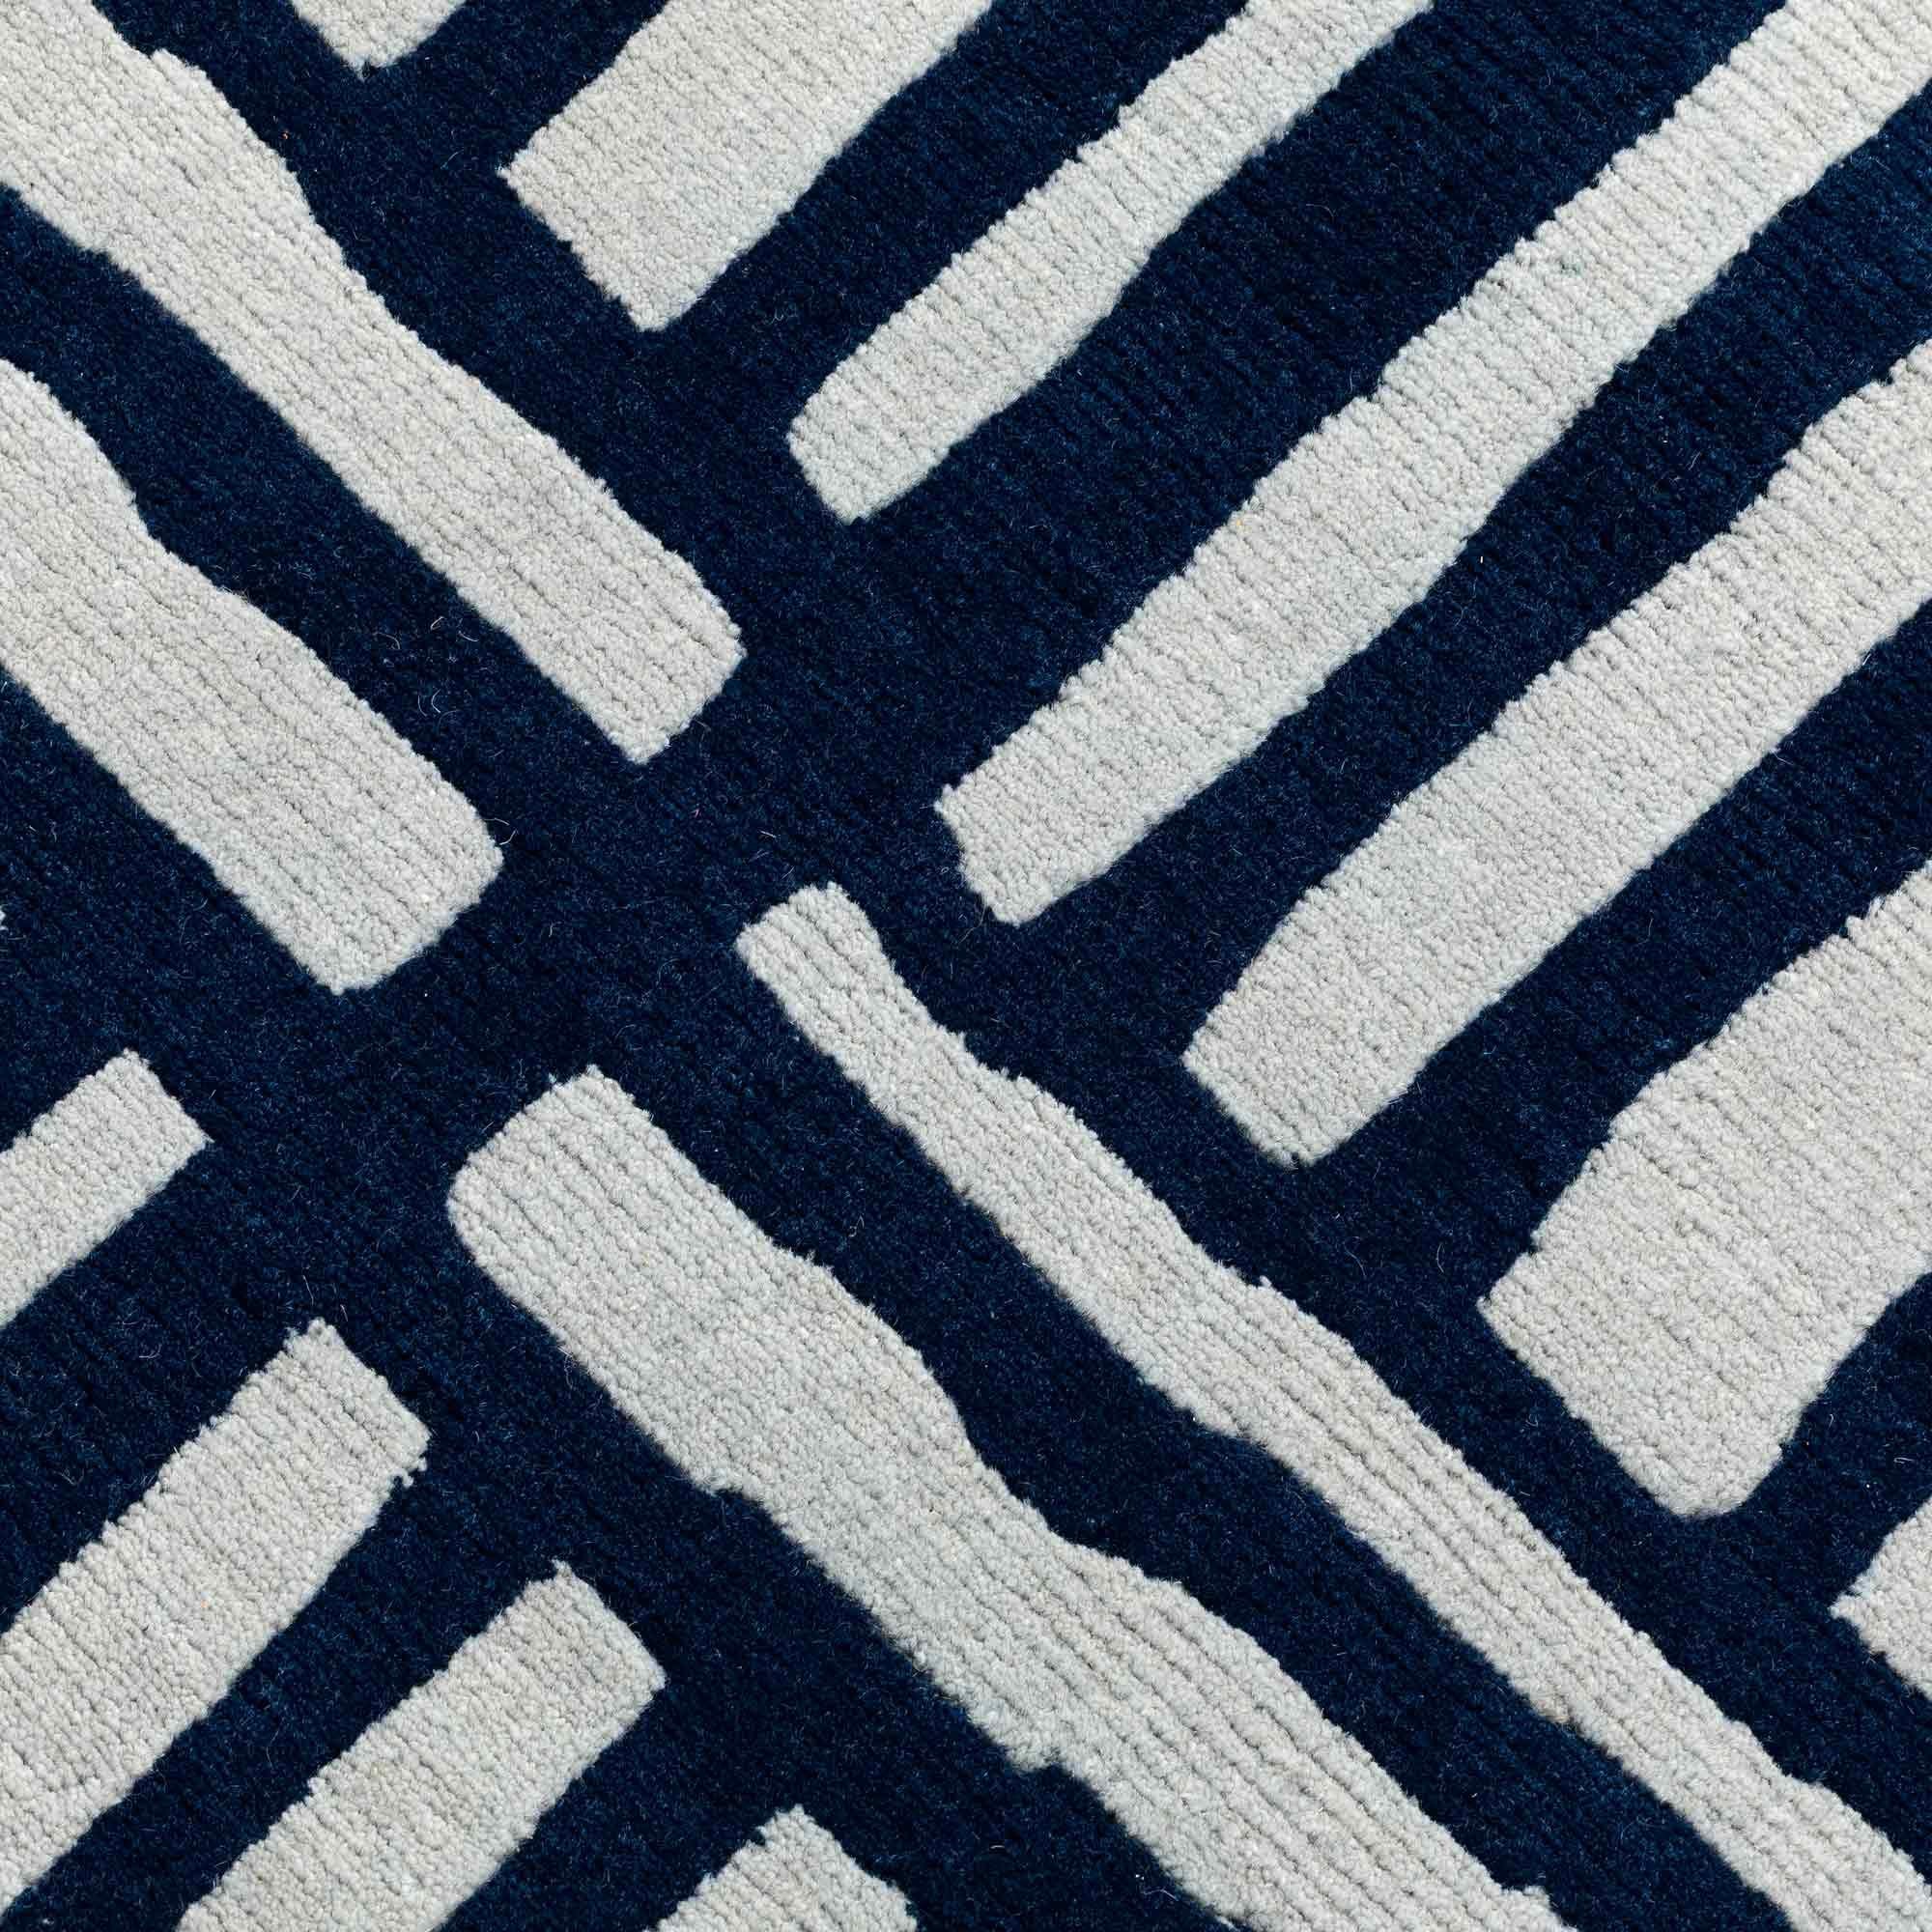 GJS12 woollen carpet by George J. Sowden for Post Design collection/Memphis

A woollen carpet handcrafted by different Nepalese artisans. Made in a limited edition of 36 signed, numbered examples.

As the carpet is made by hand, there are slight